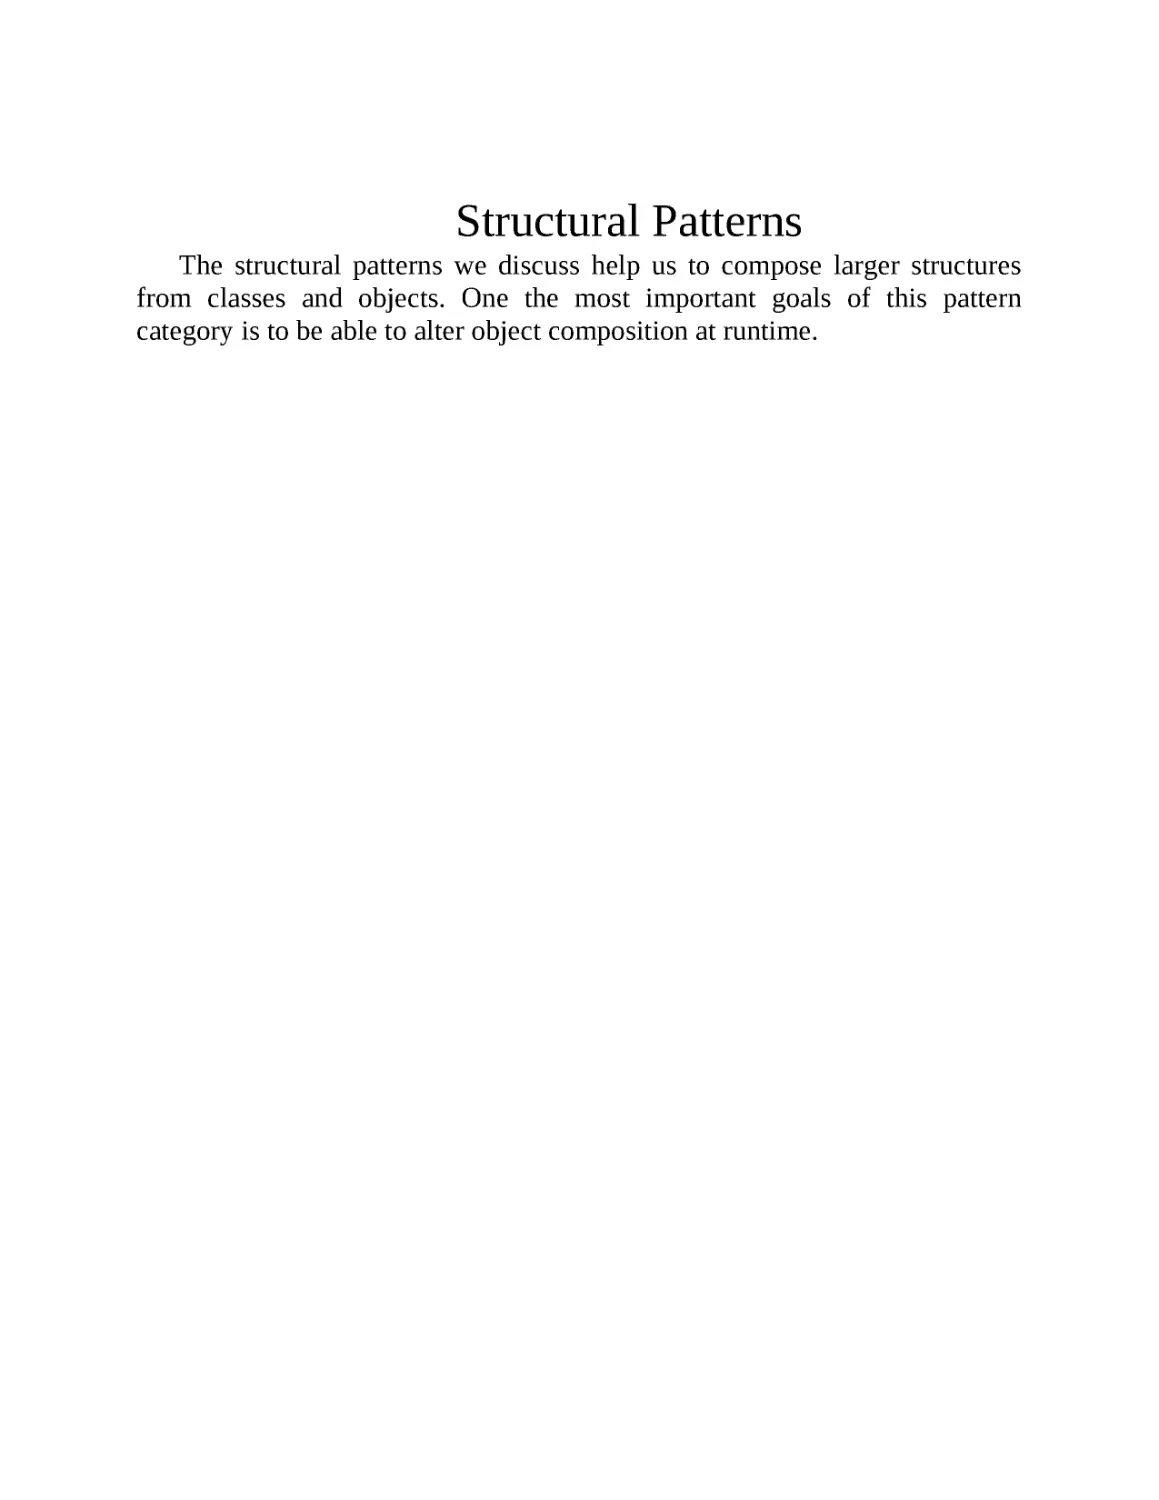 ﻿Structural Pattern